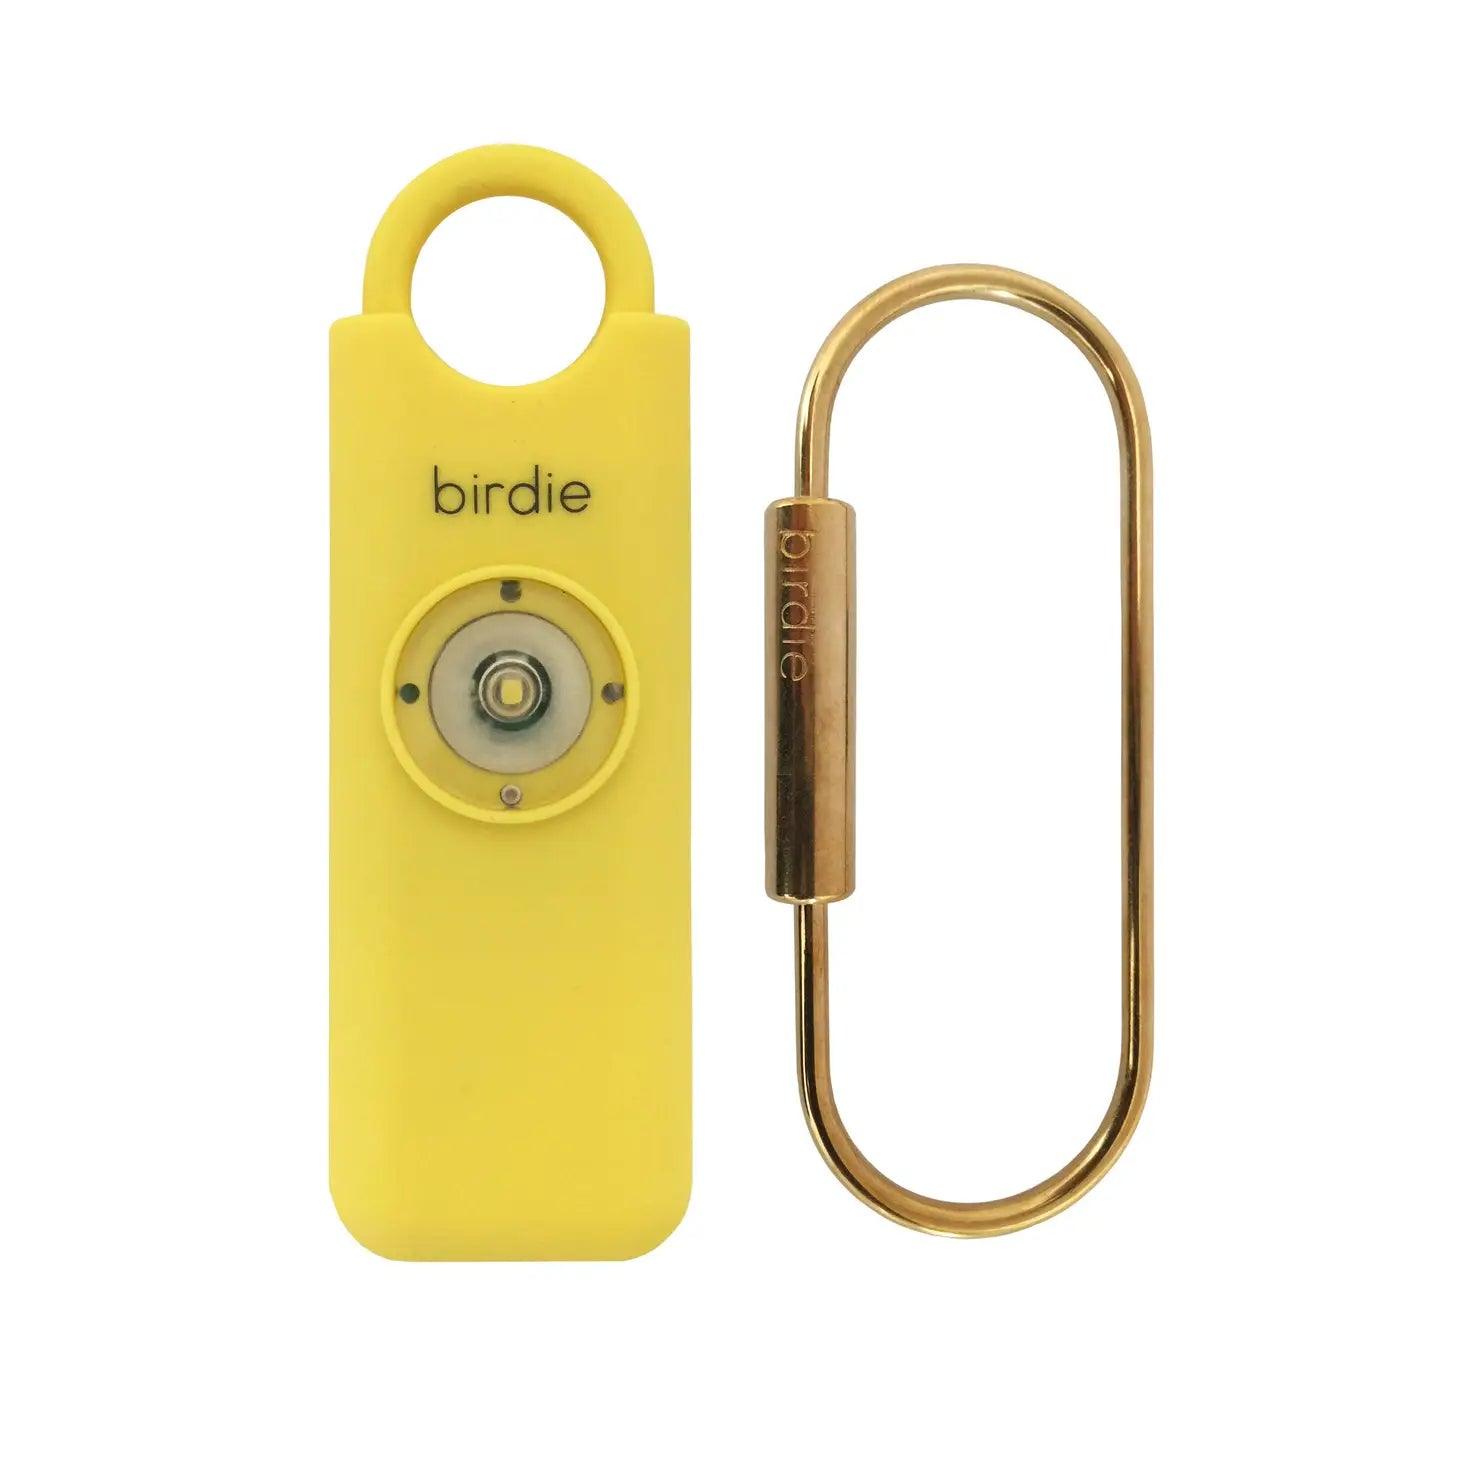 She's Birdie Personal Safety Alarm - The Salty Mare